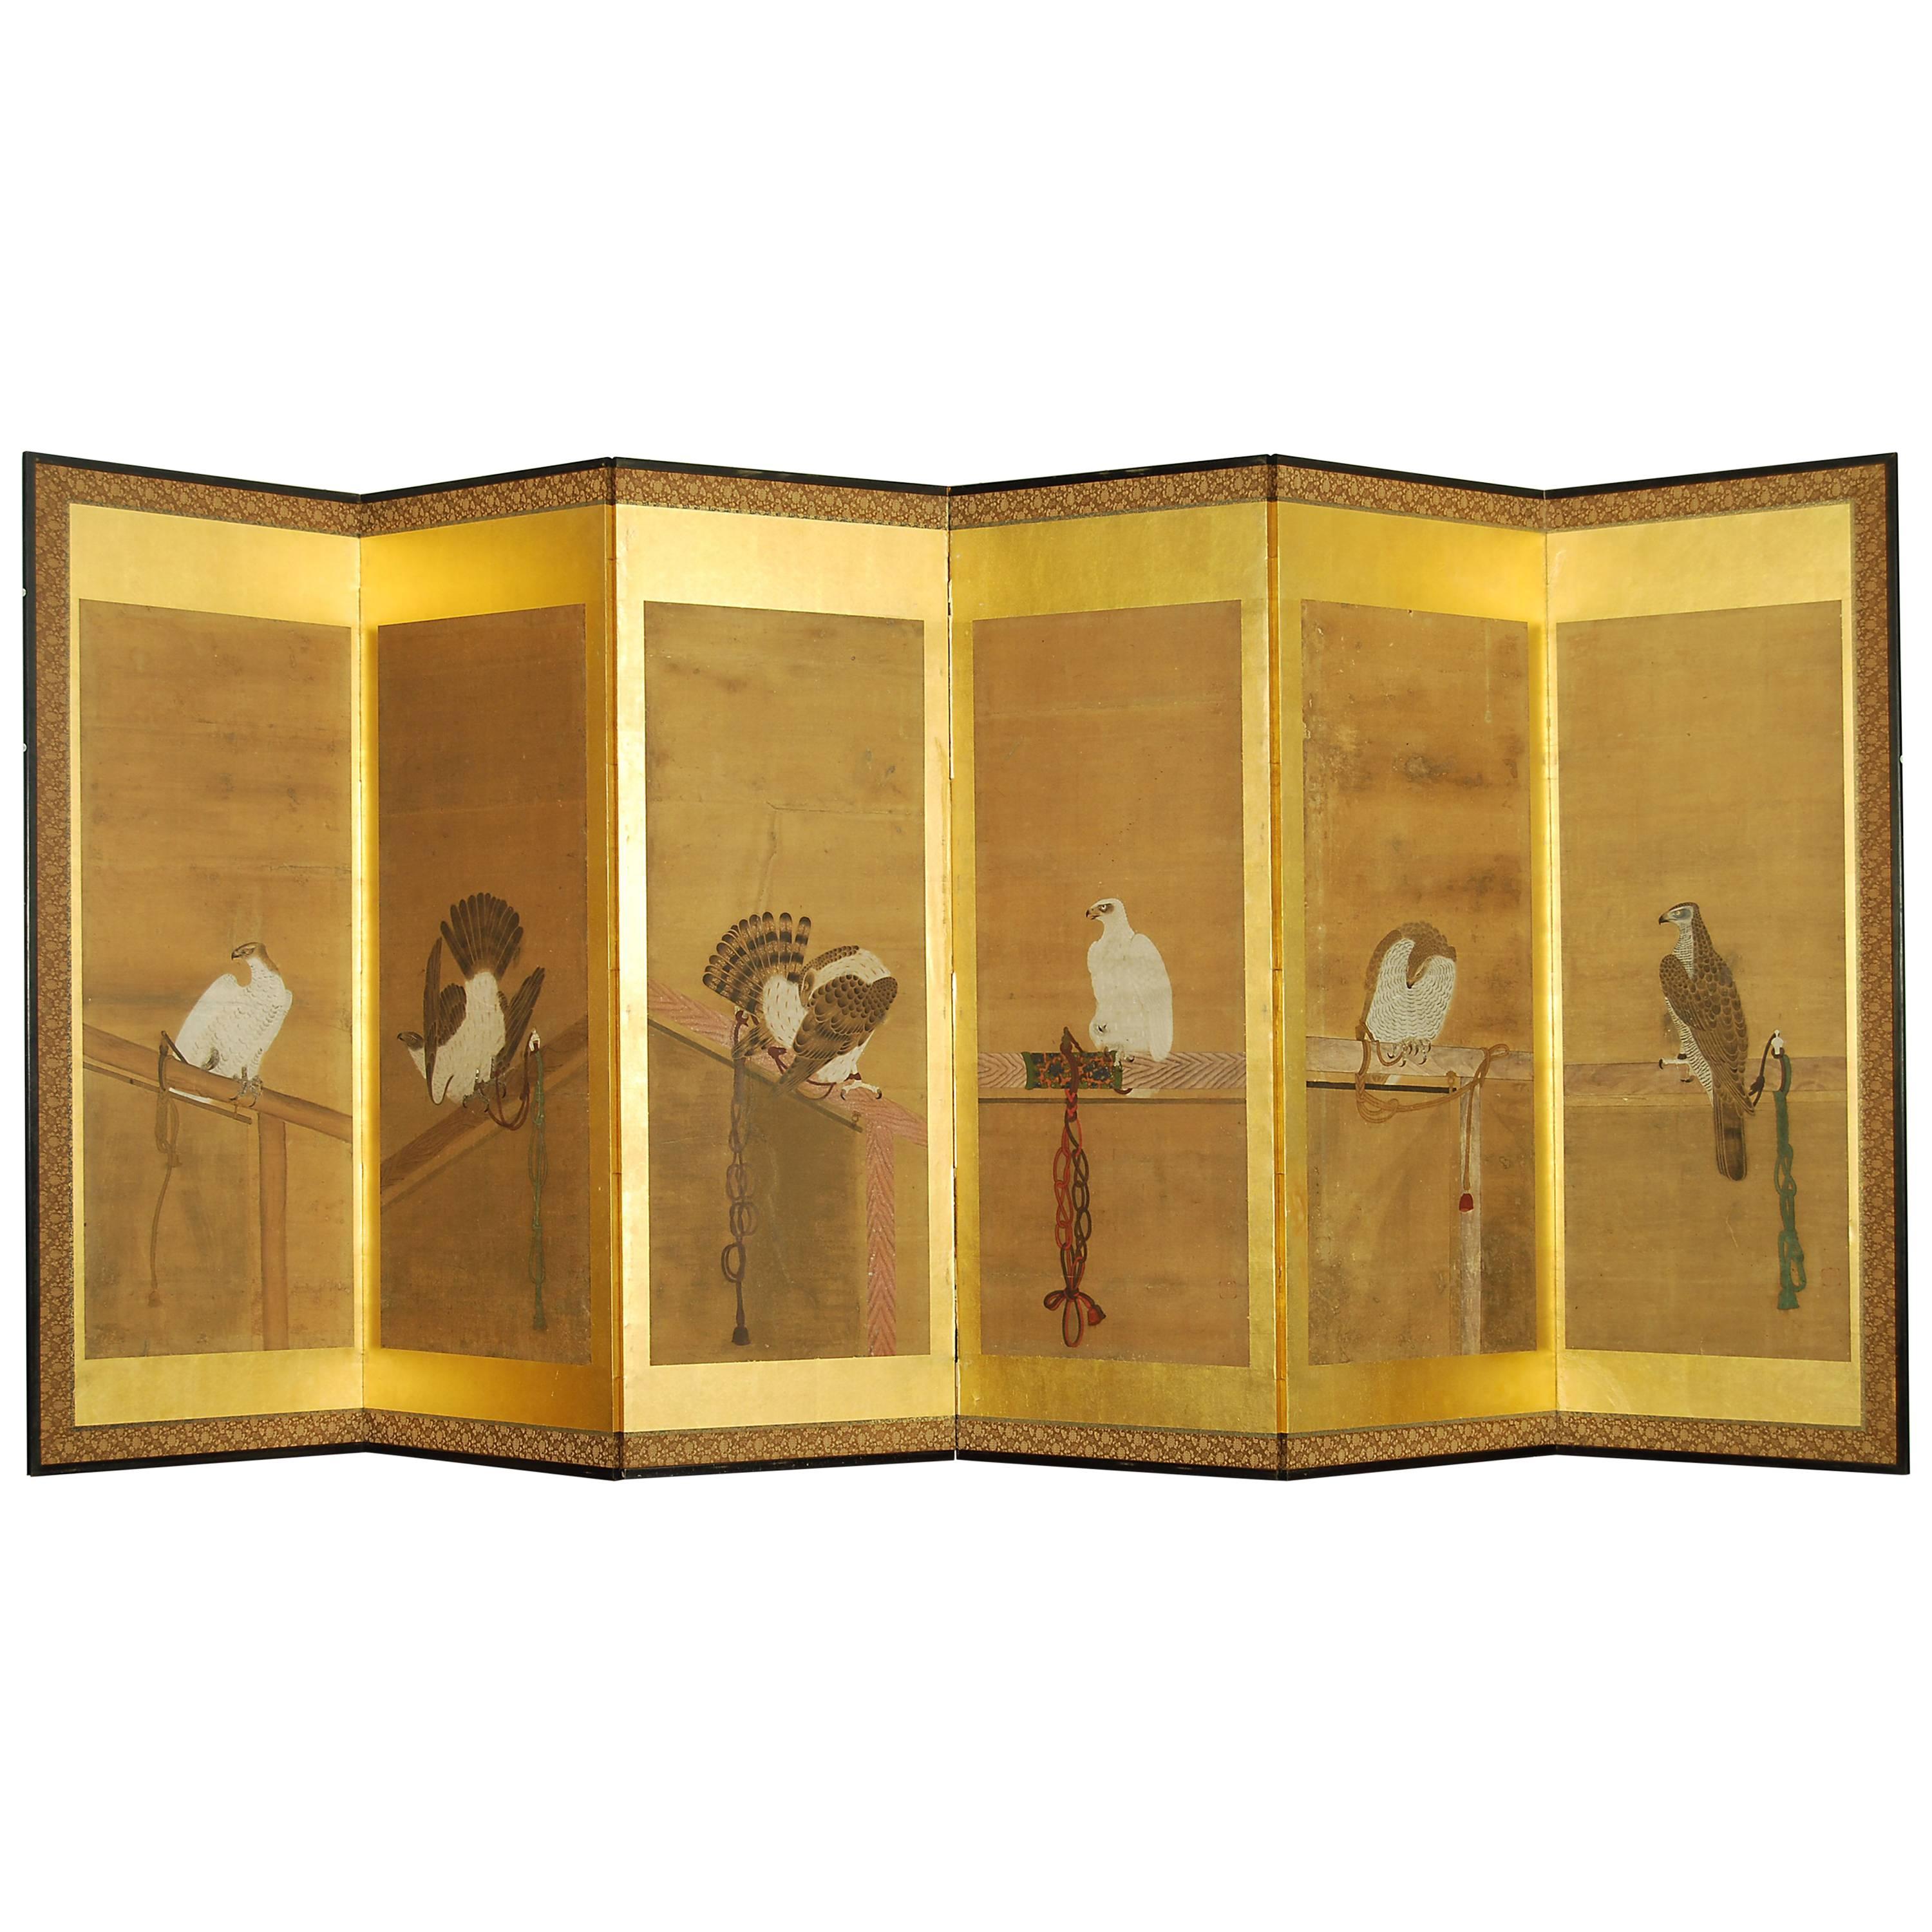 Antique Japanese Six-Panel Screen with Soga School Paintings of Hawks